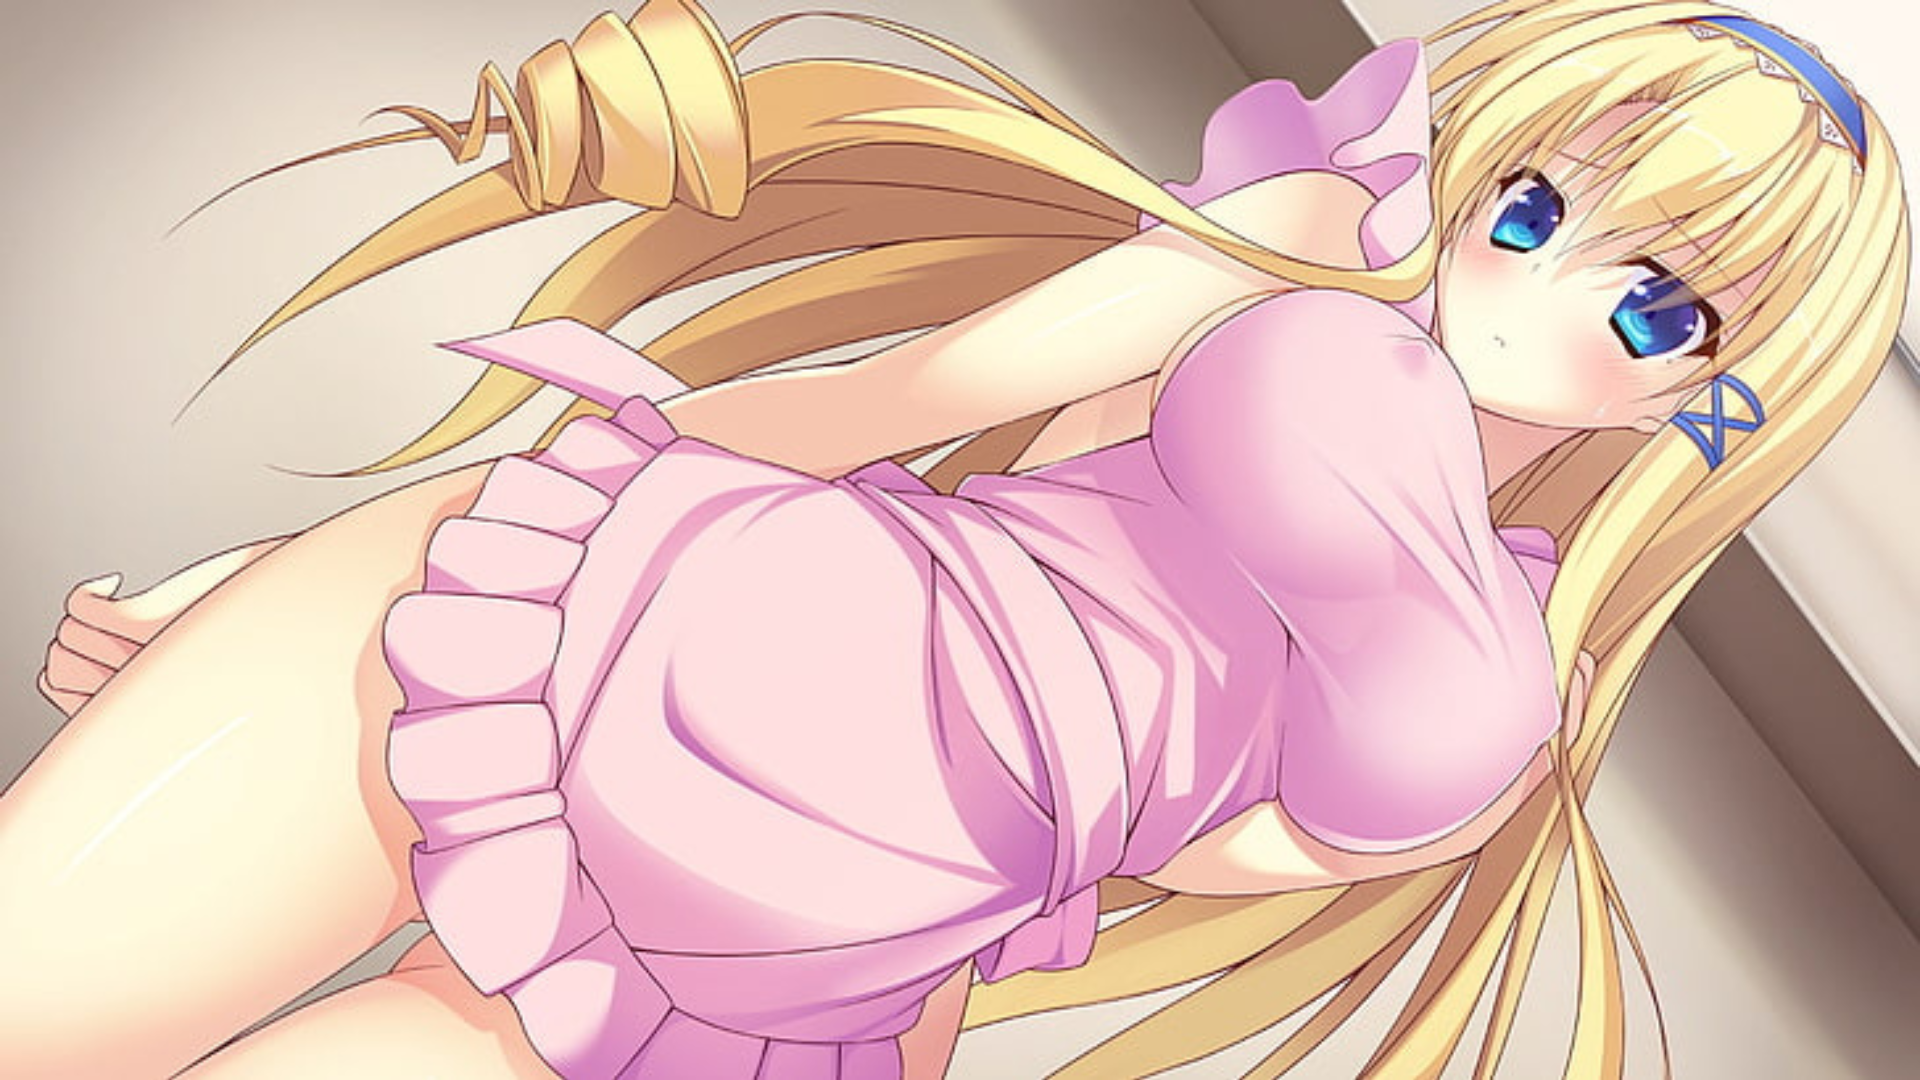 A cute anime girl with a long yellow hair and wearing pink dress 